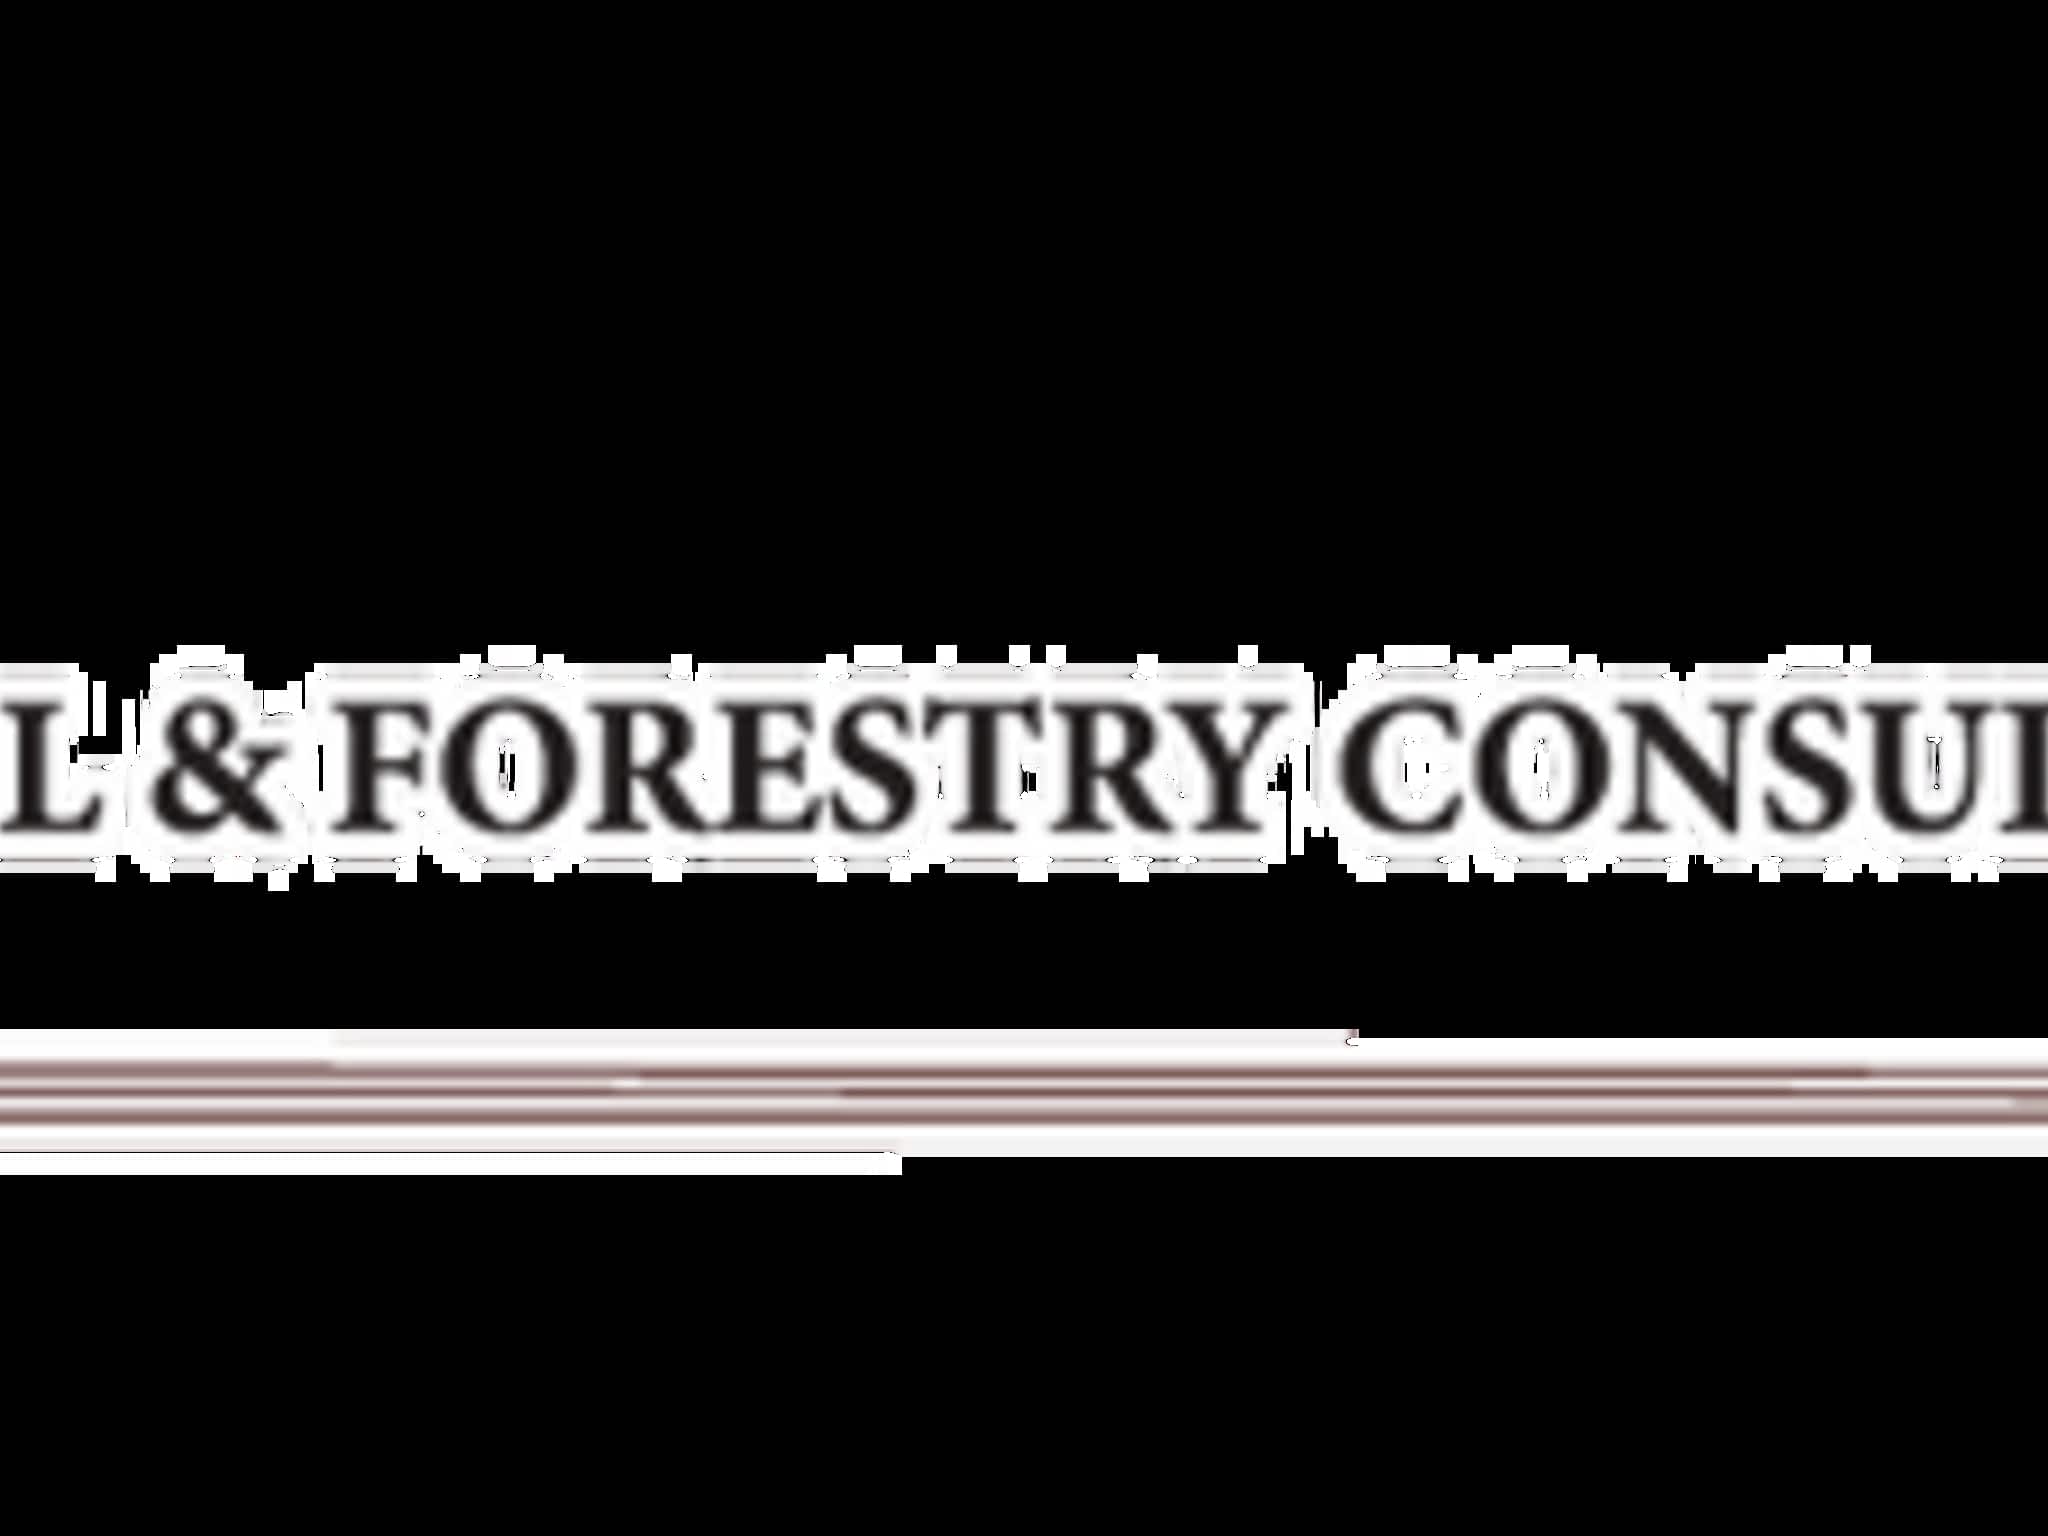 photo Soil & Forestry Consulting